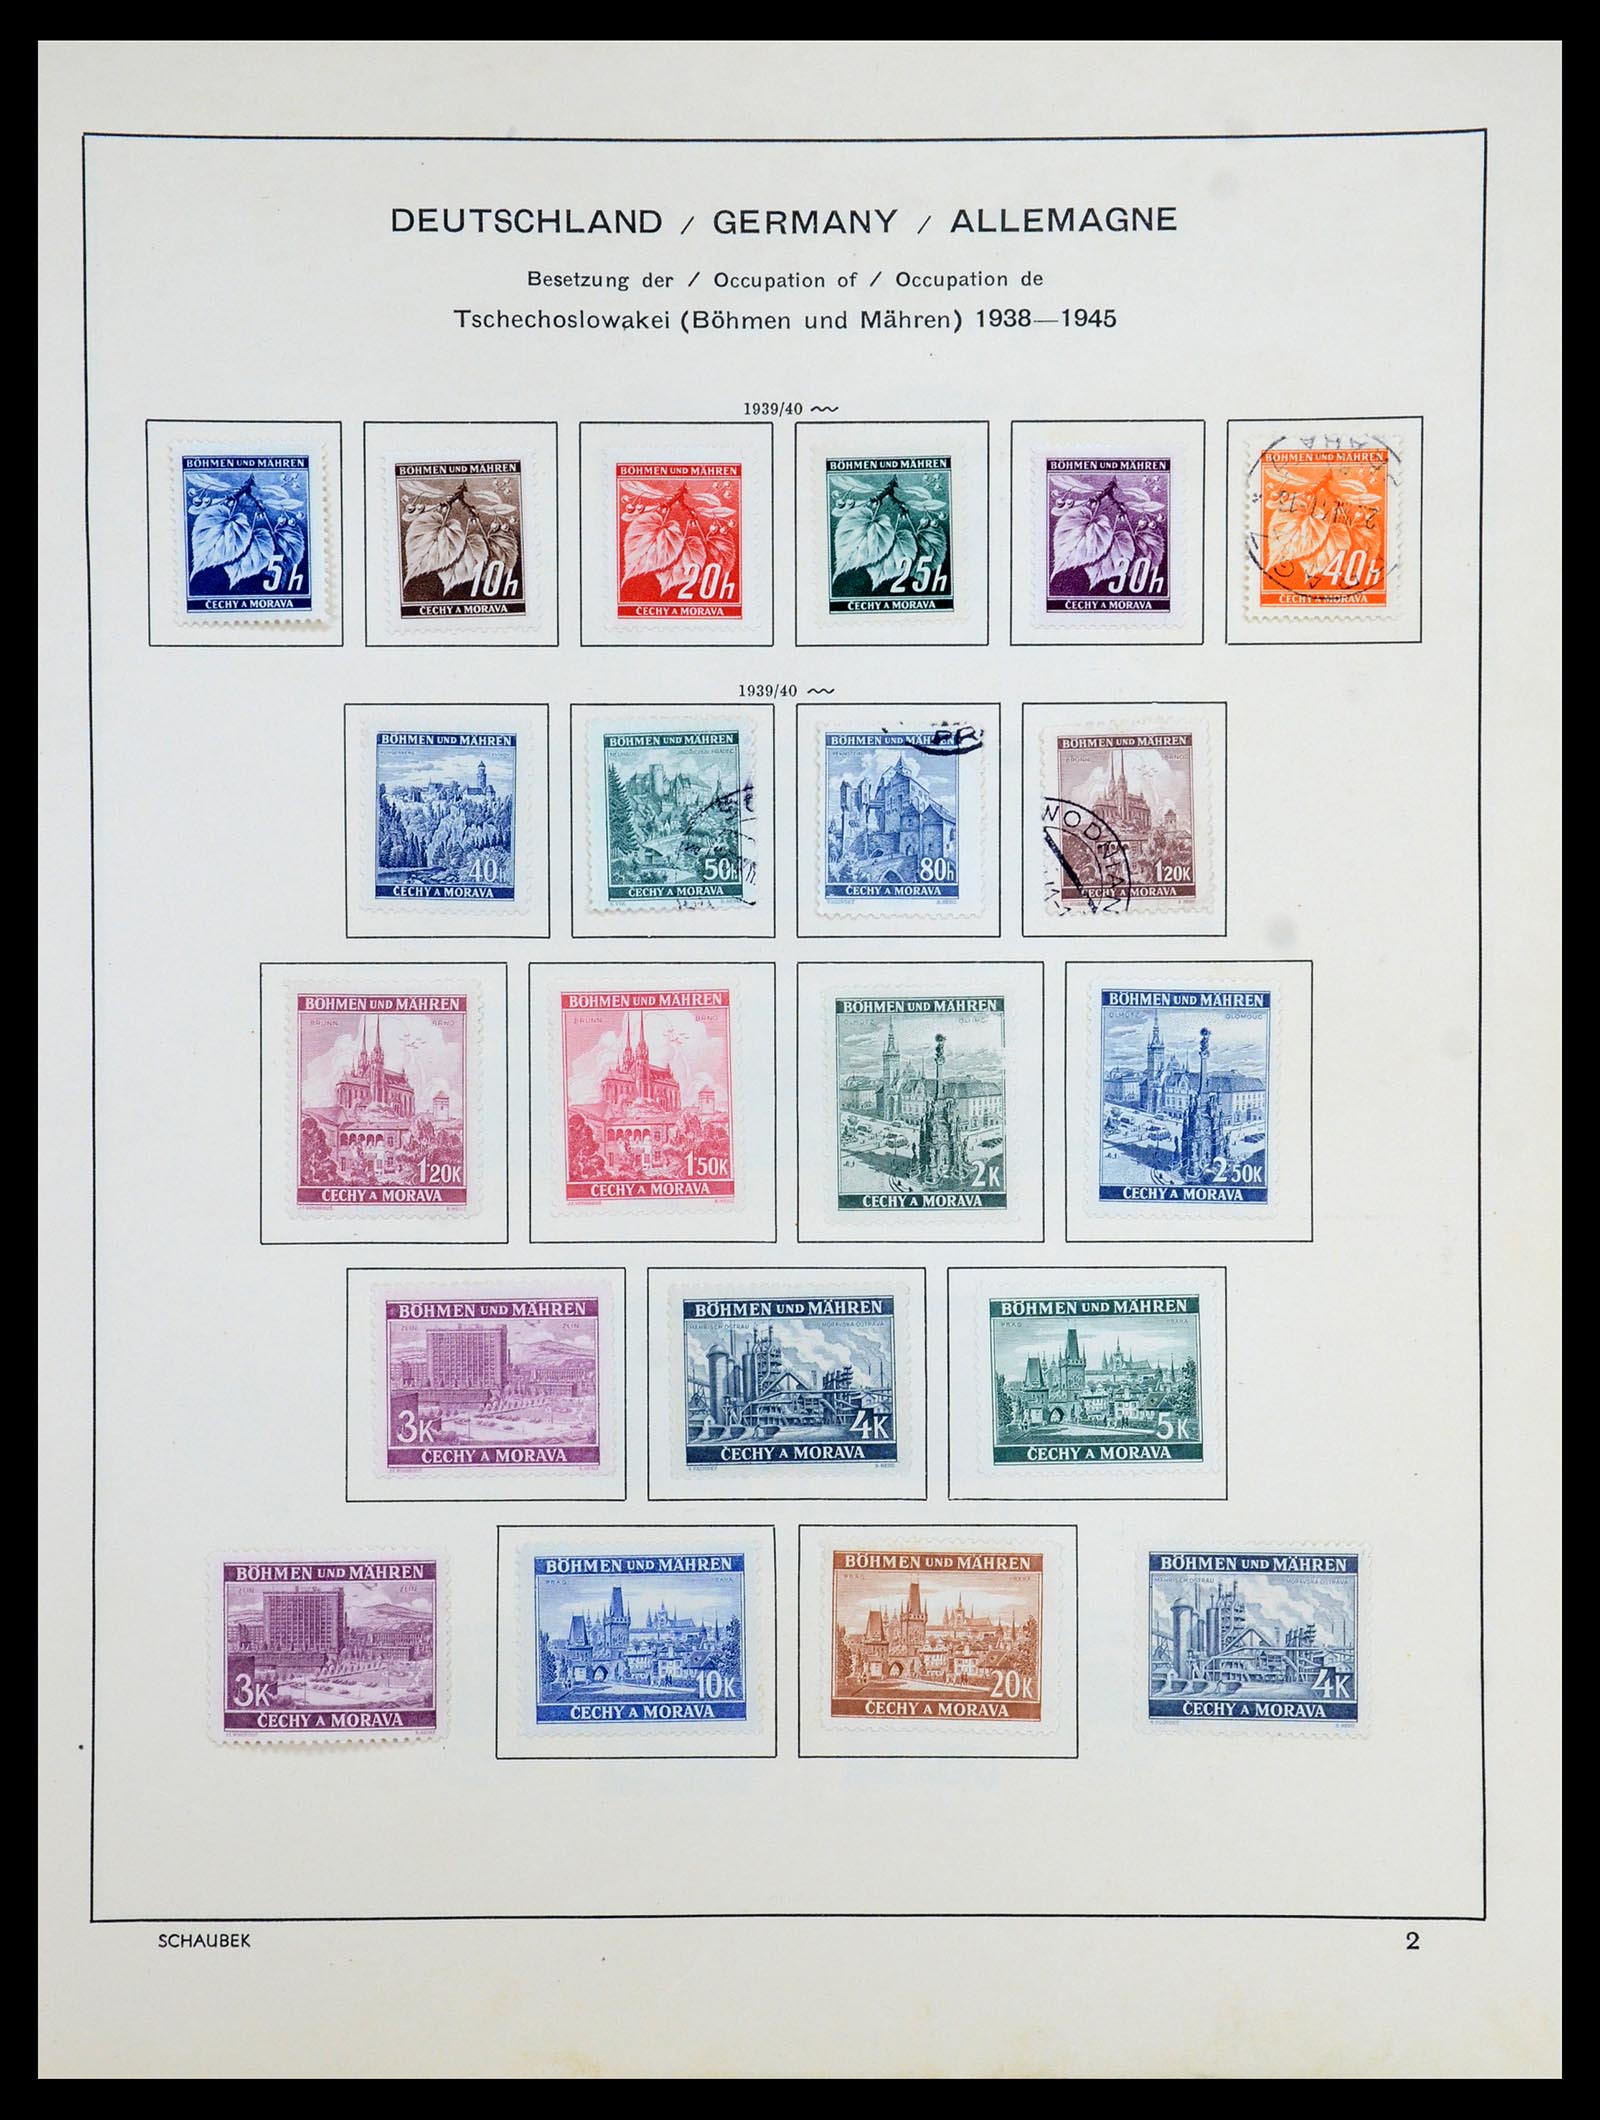 35964 022 - Stamp collection 35964 Germany occupations WW II 1939-1945.